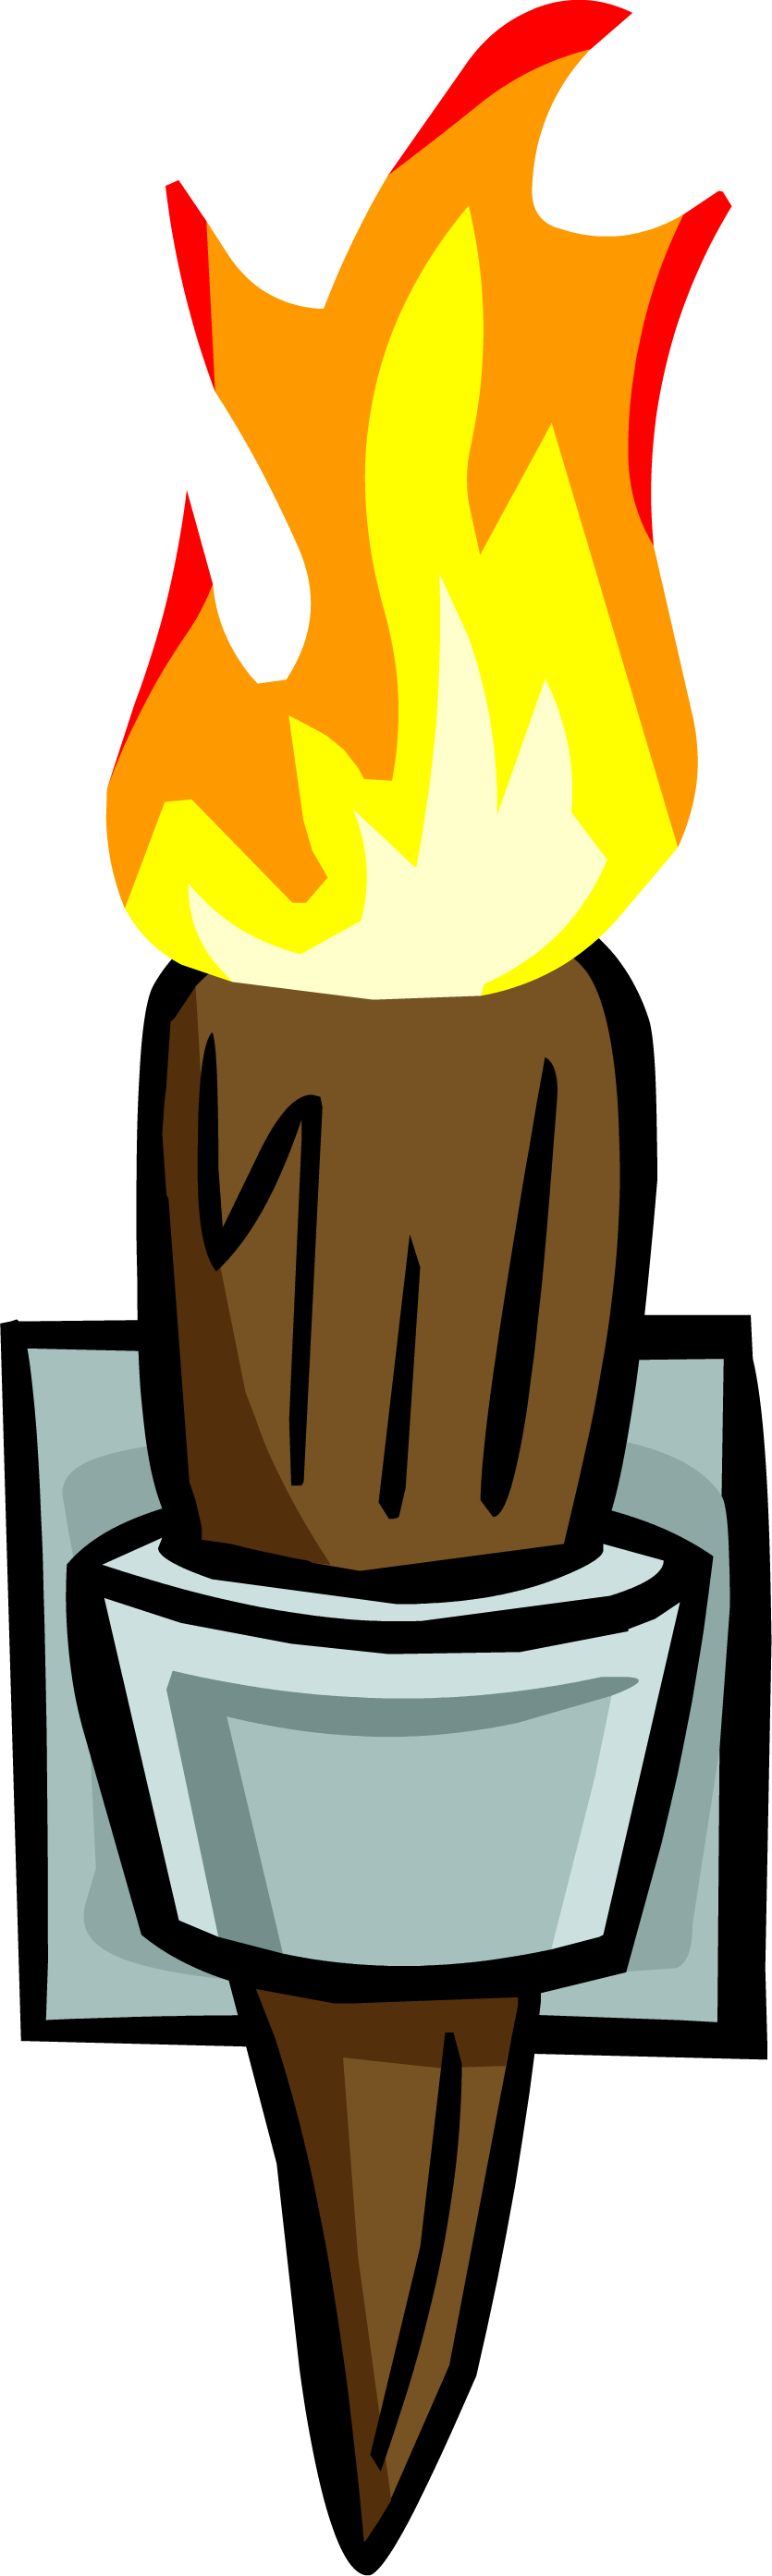 Torch clipart victory, Torch victory Transparent FREE for